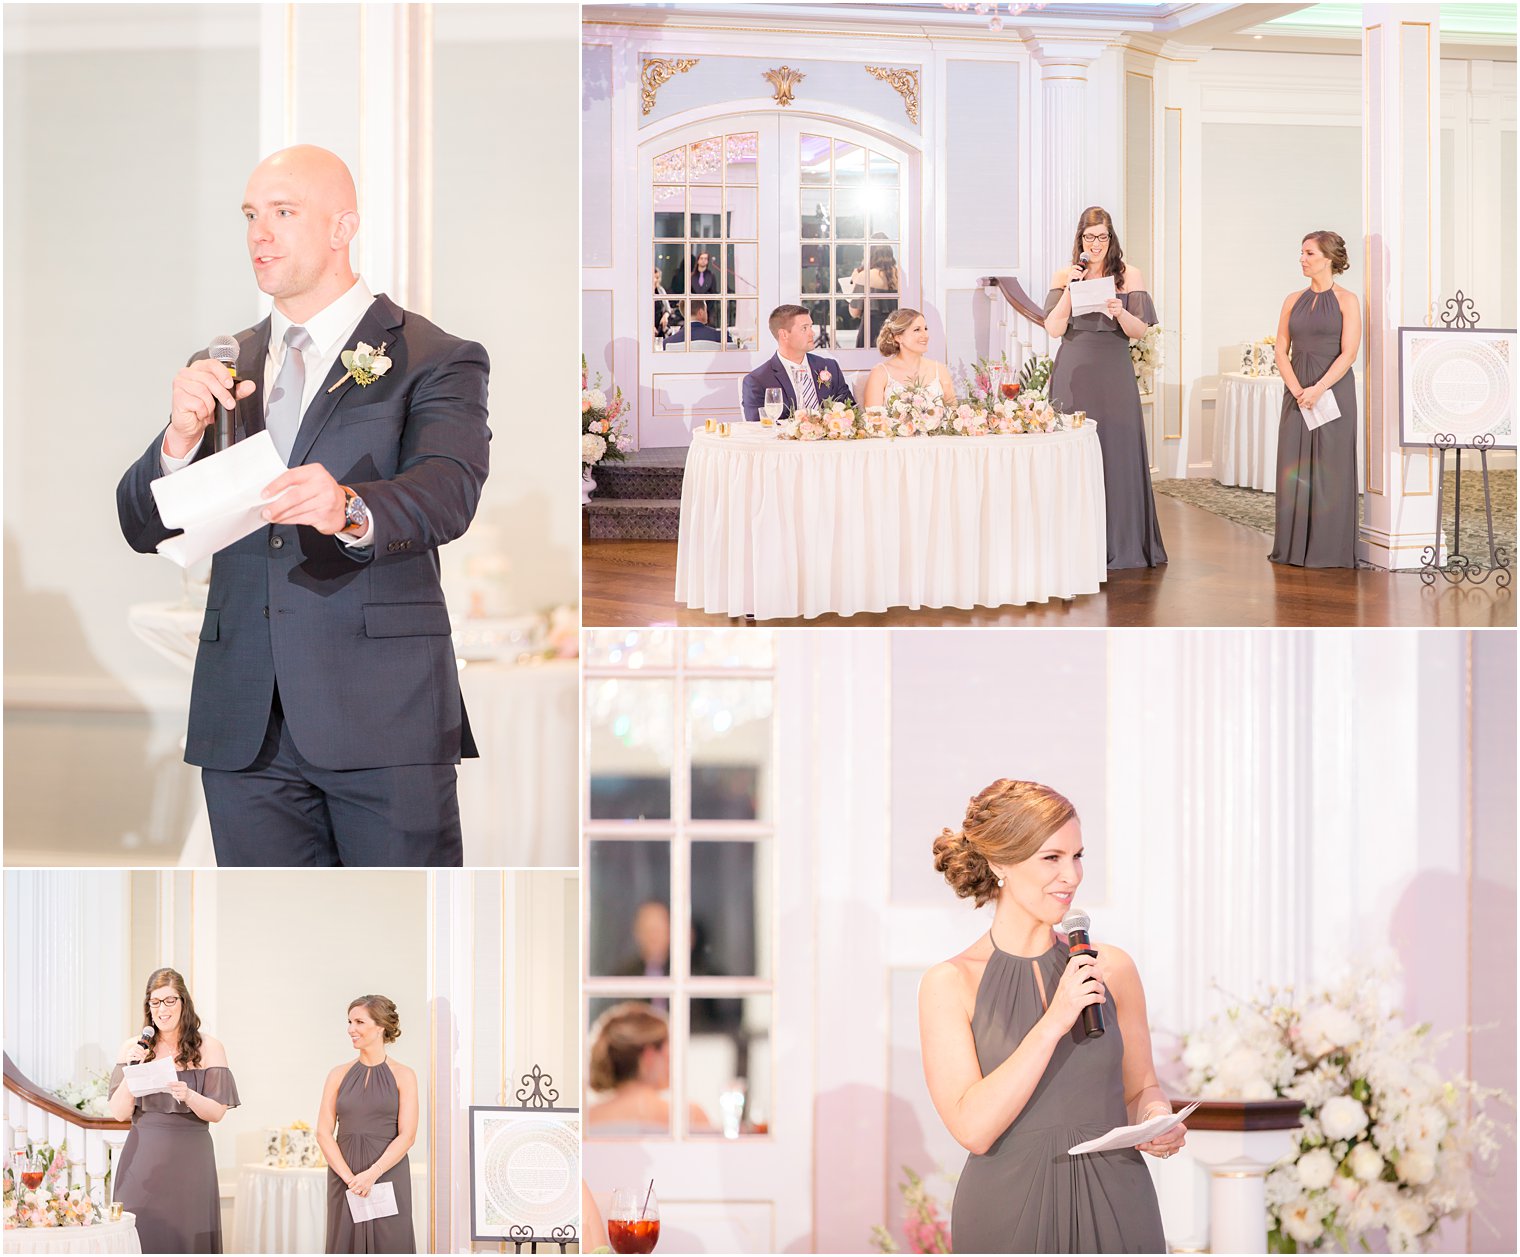 Toasts during wedding reception at The Mill at Lakeside Manor in Spring Lake NJ